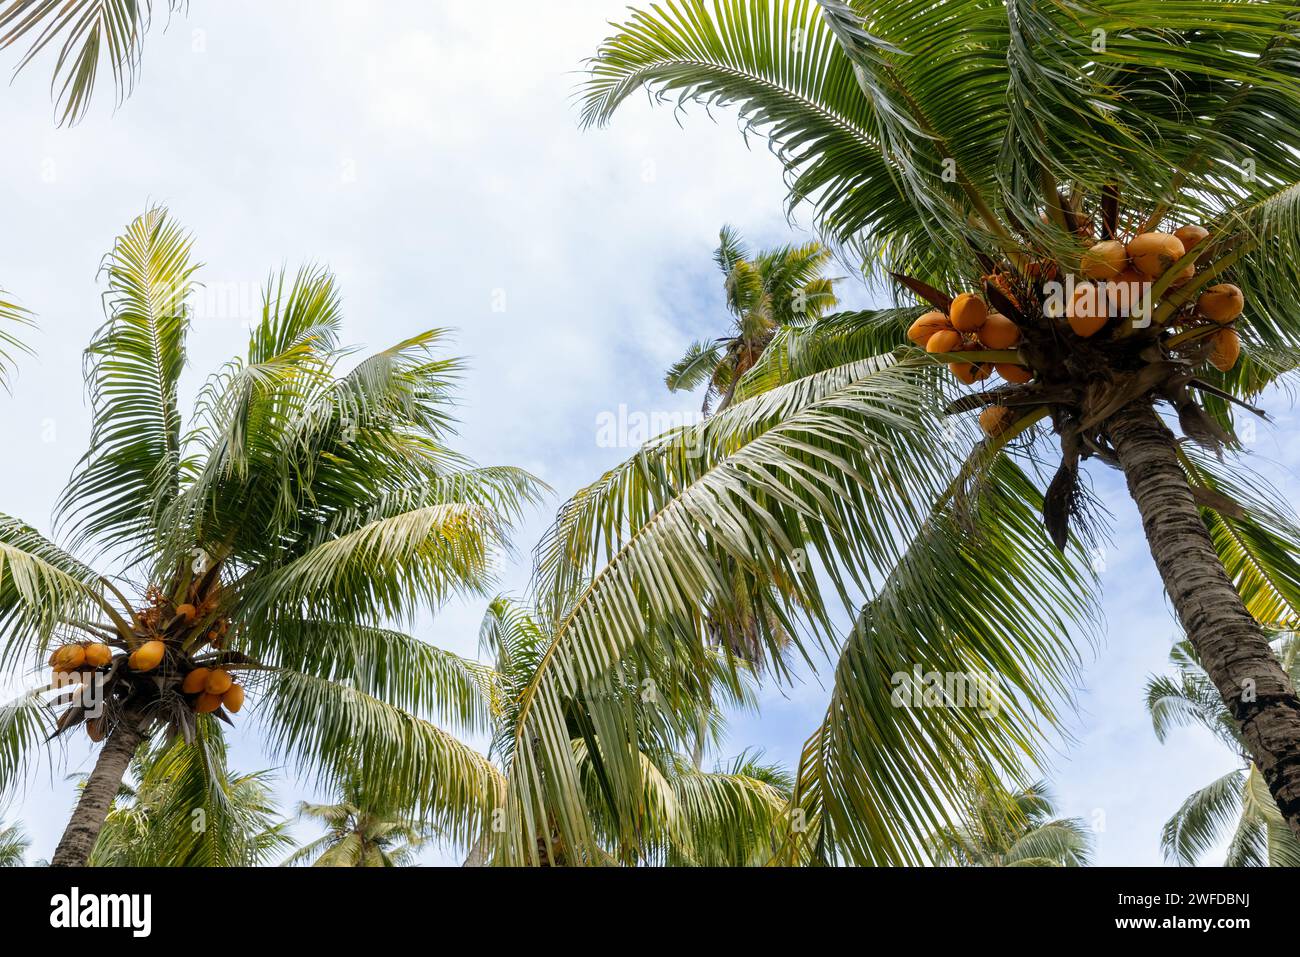 Coconut palms with yellow fruits are under bright blue sky on a sunny day, Cocos nucifera Stock Photo